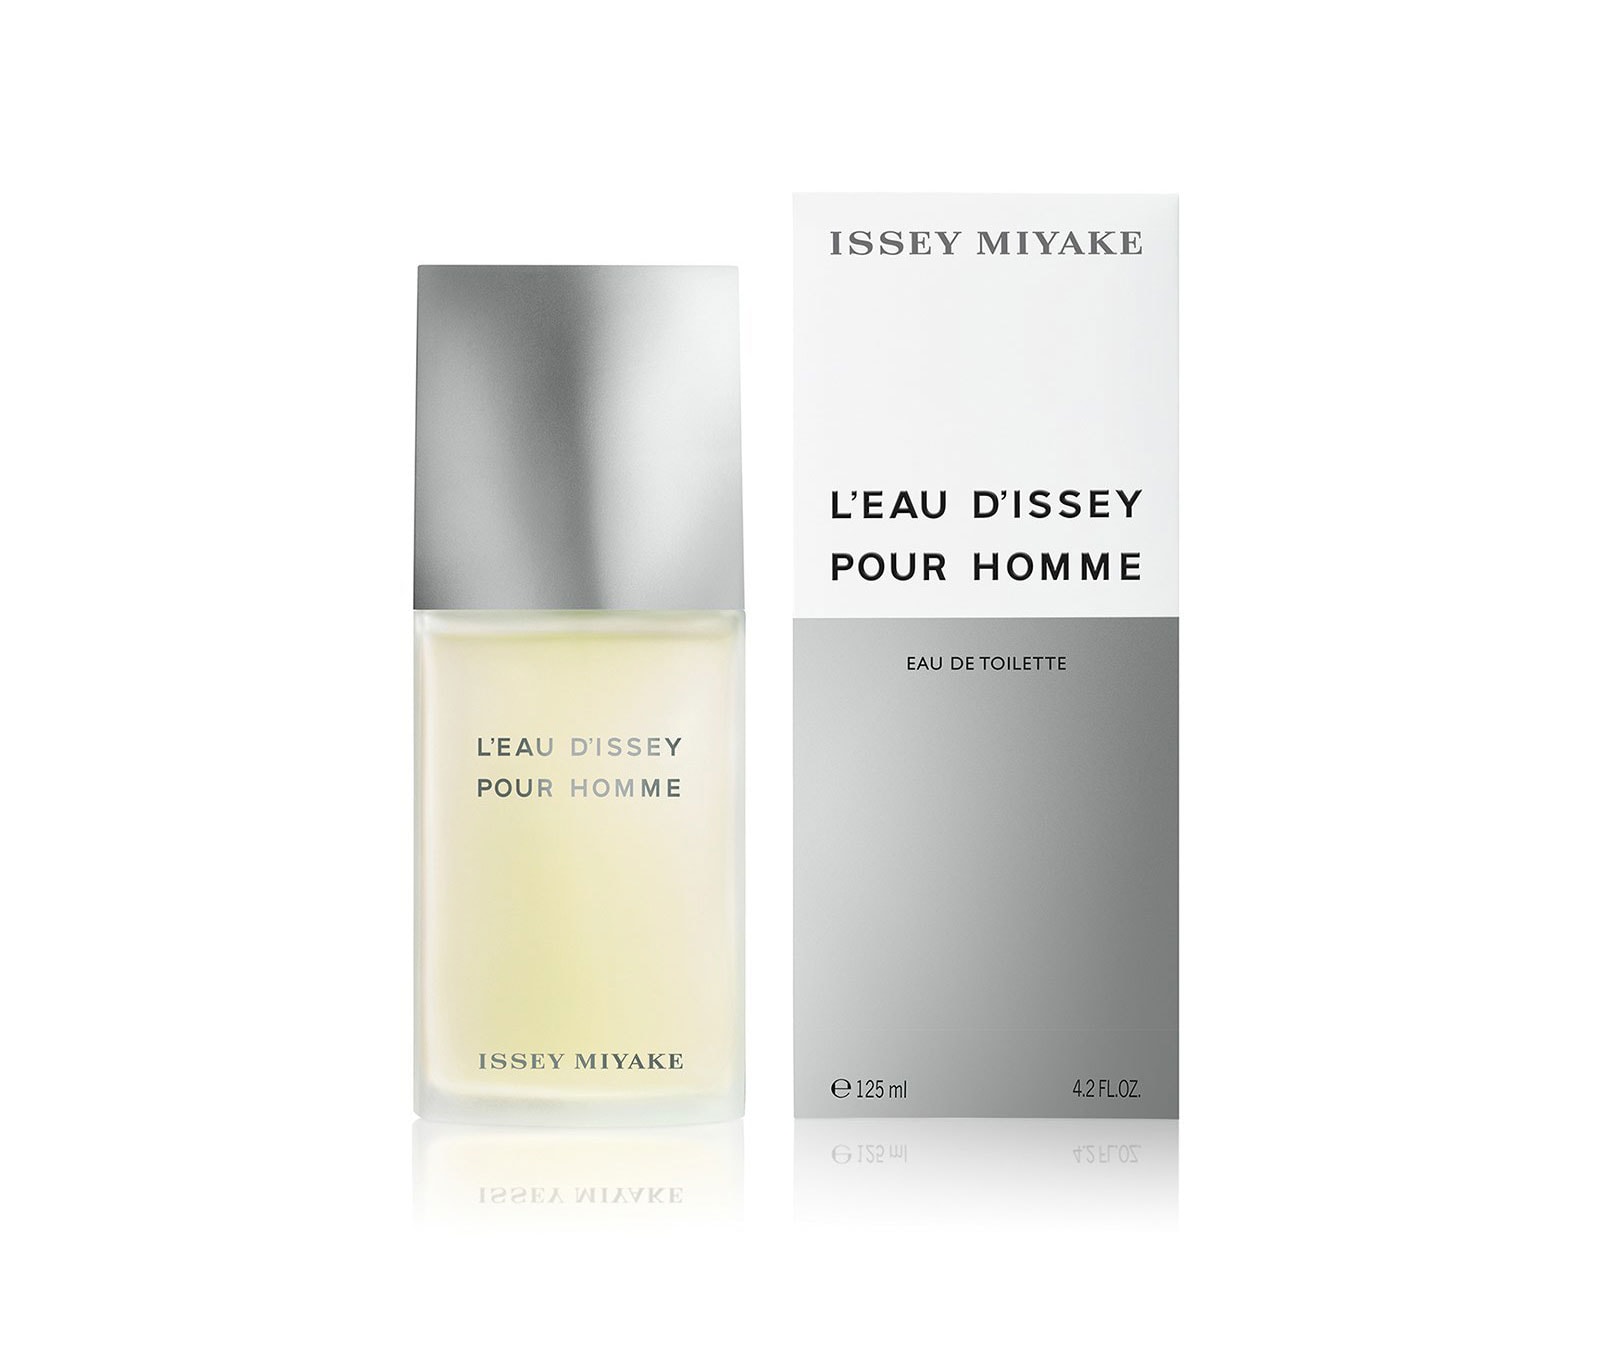 L'eau D'issey Pour Homme » Issey Miyake » The Parfumerie » Sri Lanka